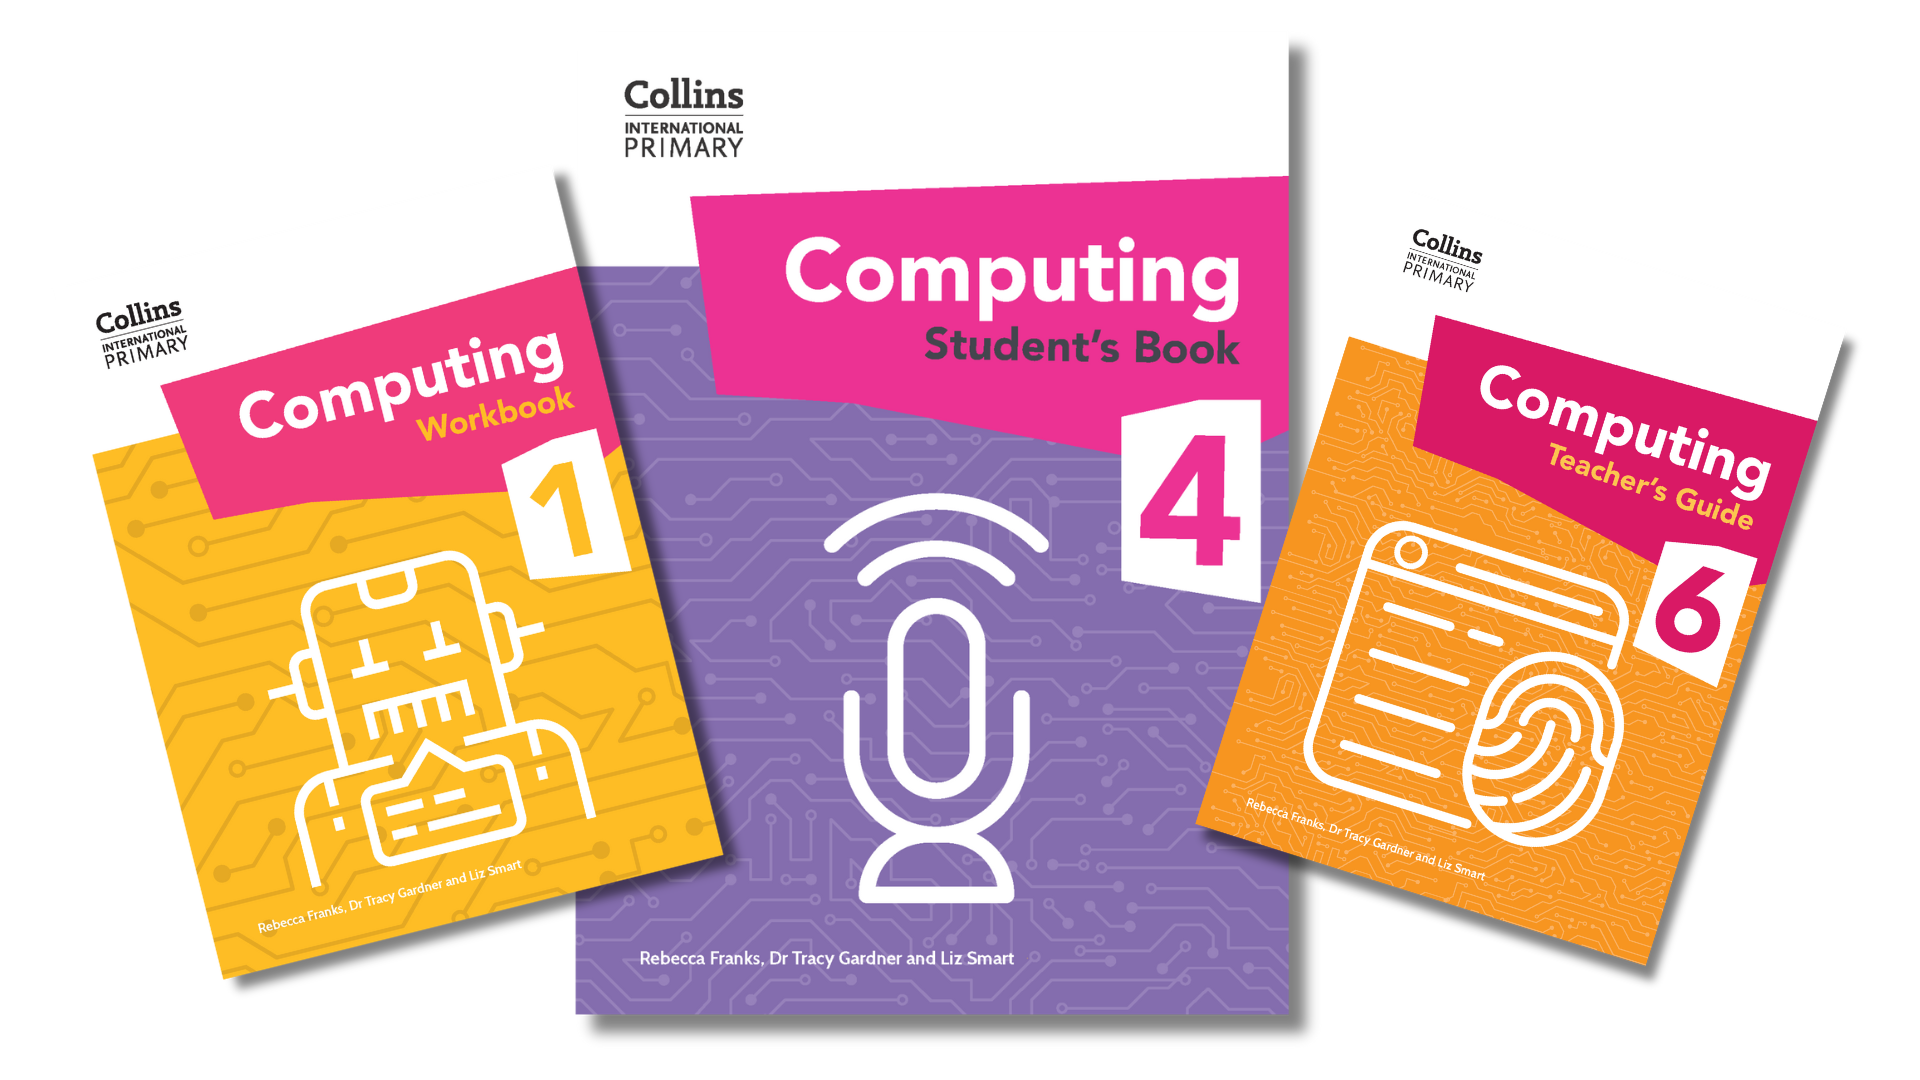 Three books from the Collins International primary computing book series.